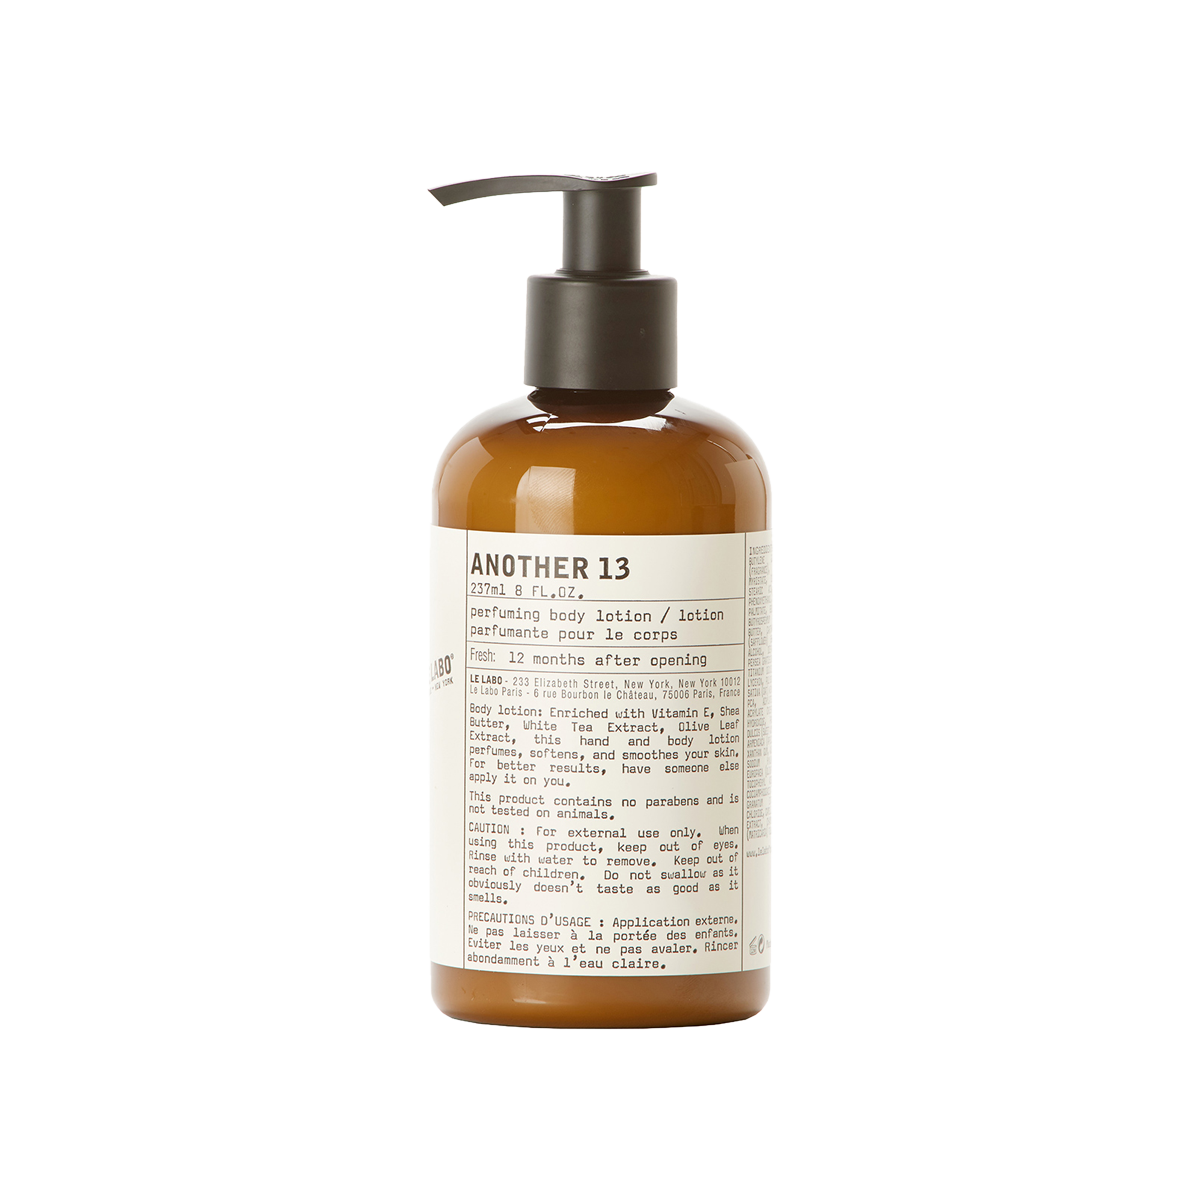 Le Labo fragrances - AnOther 13 Body Lotion